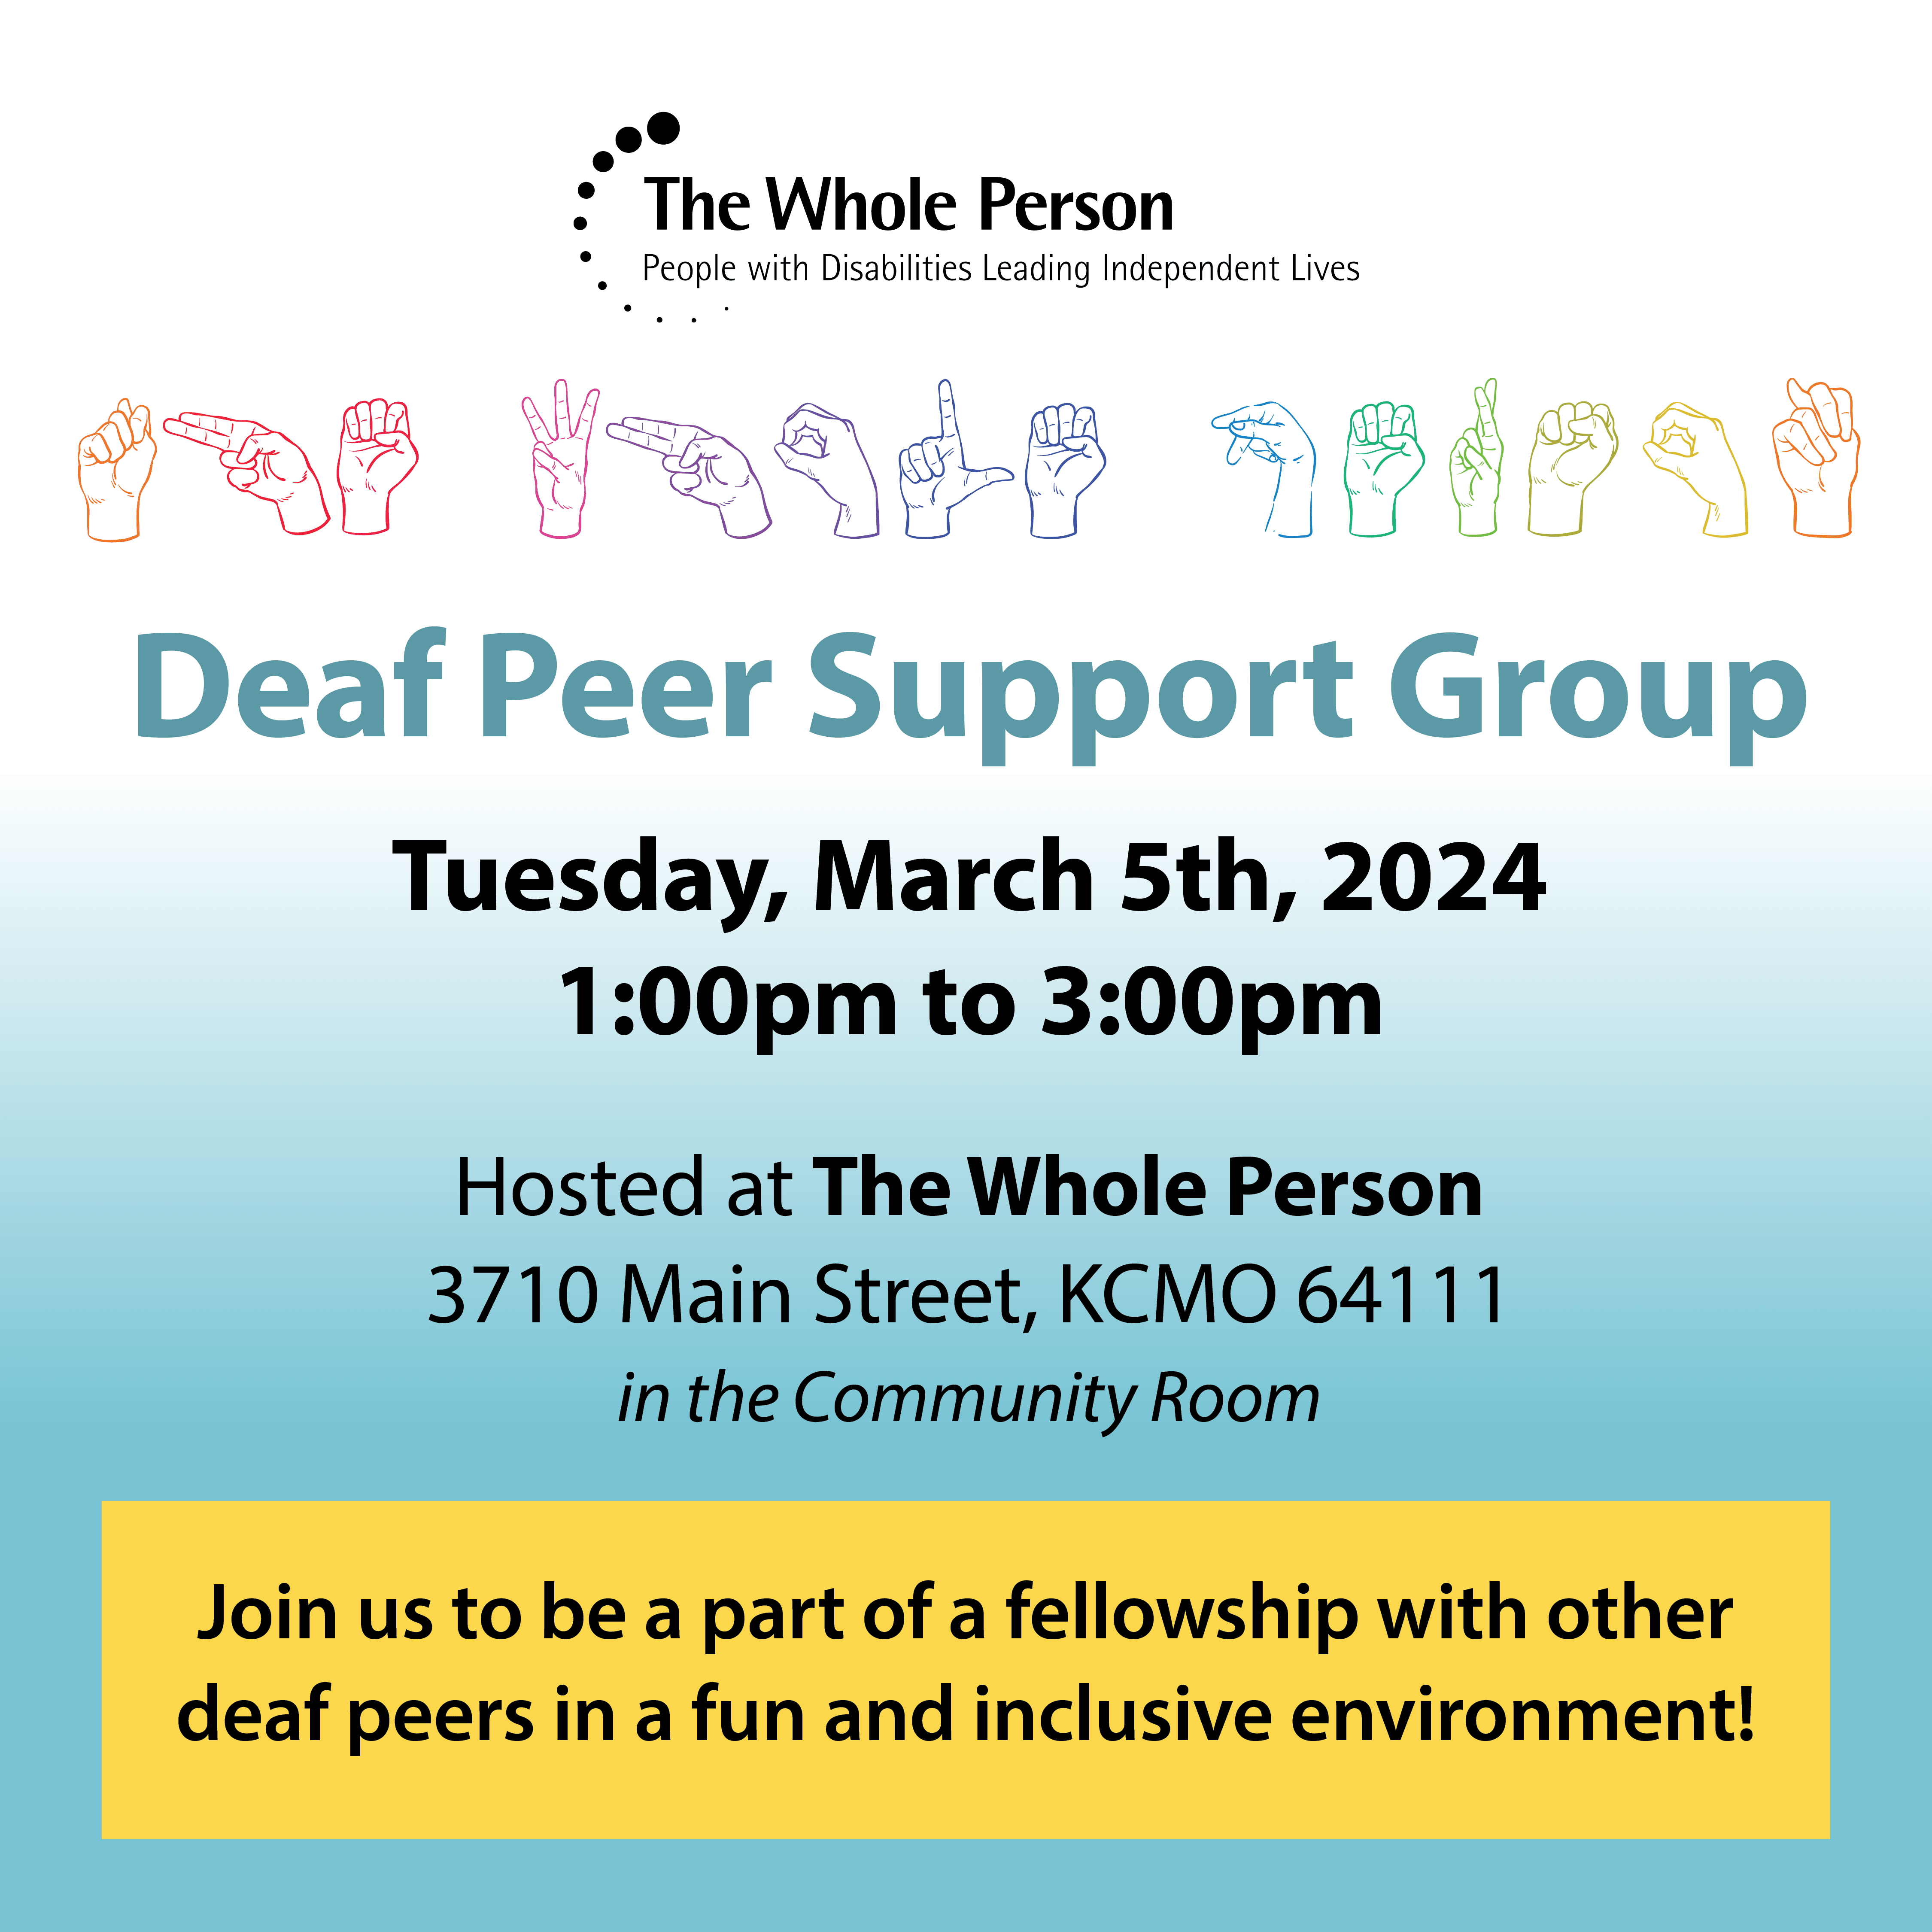 on a white and light blue background, there is the whole person logo in black and colorful hand outlines finger spelling the words "the whole person". Below this, the text reads "deaf peer support group. tuesday march 5th 1-3pm. hosted by the whole person